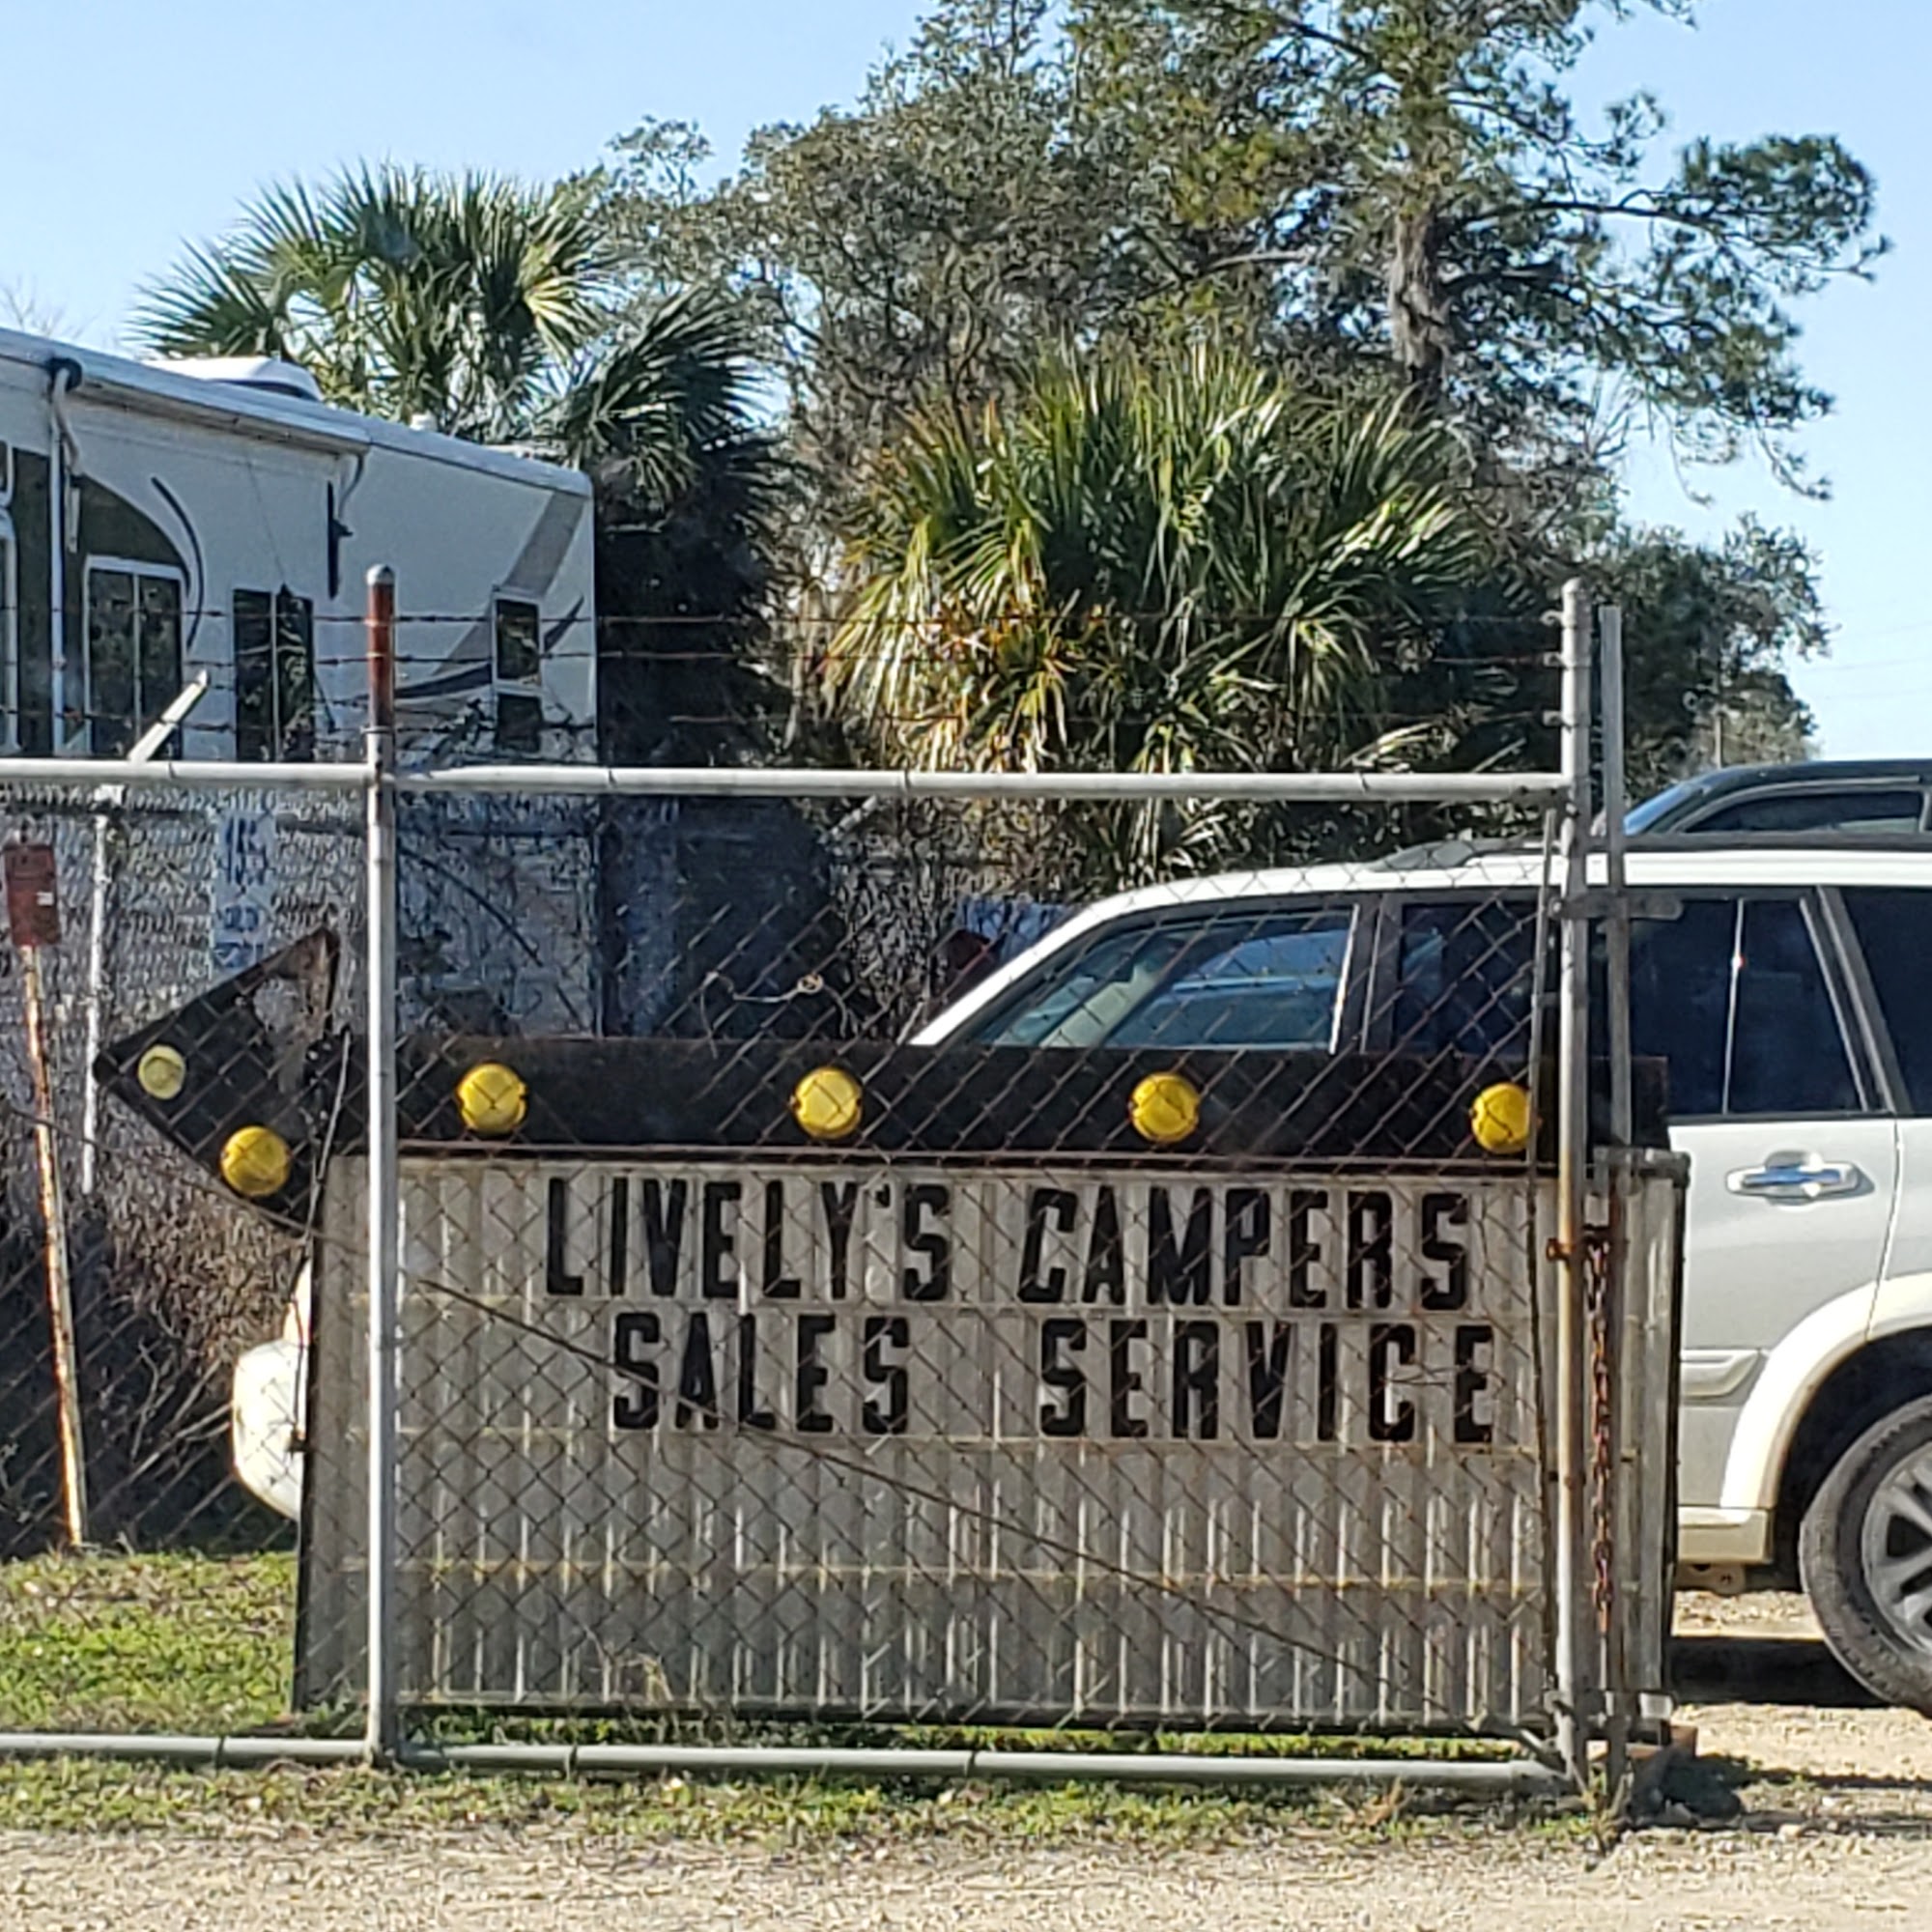 Livelys Campers 1557 Carlton Cemetery Rd, Perry Florida 32348